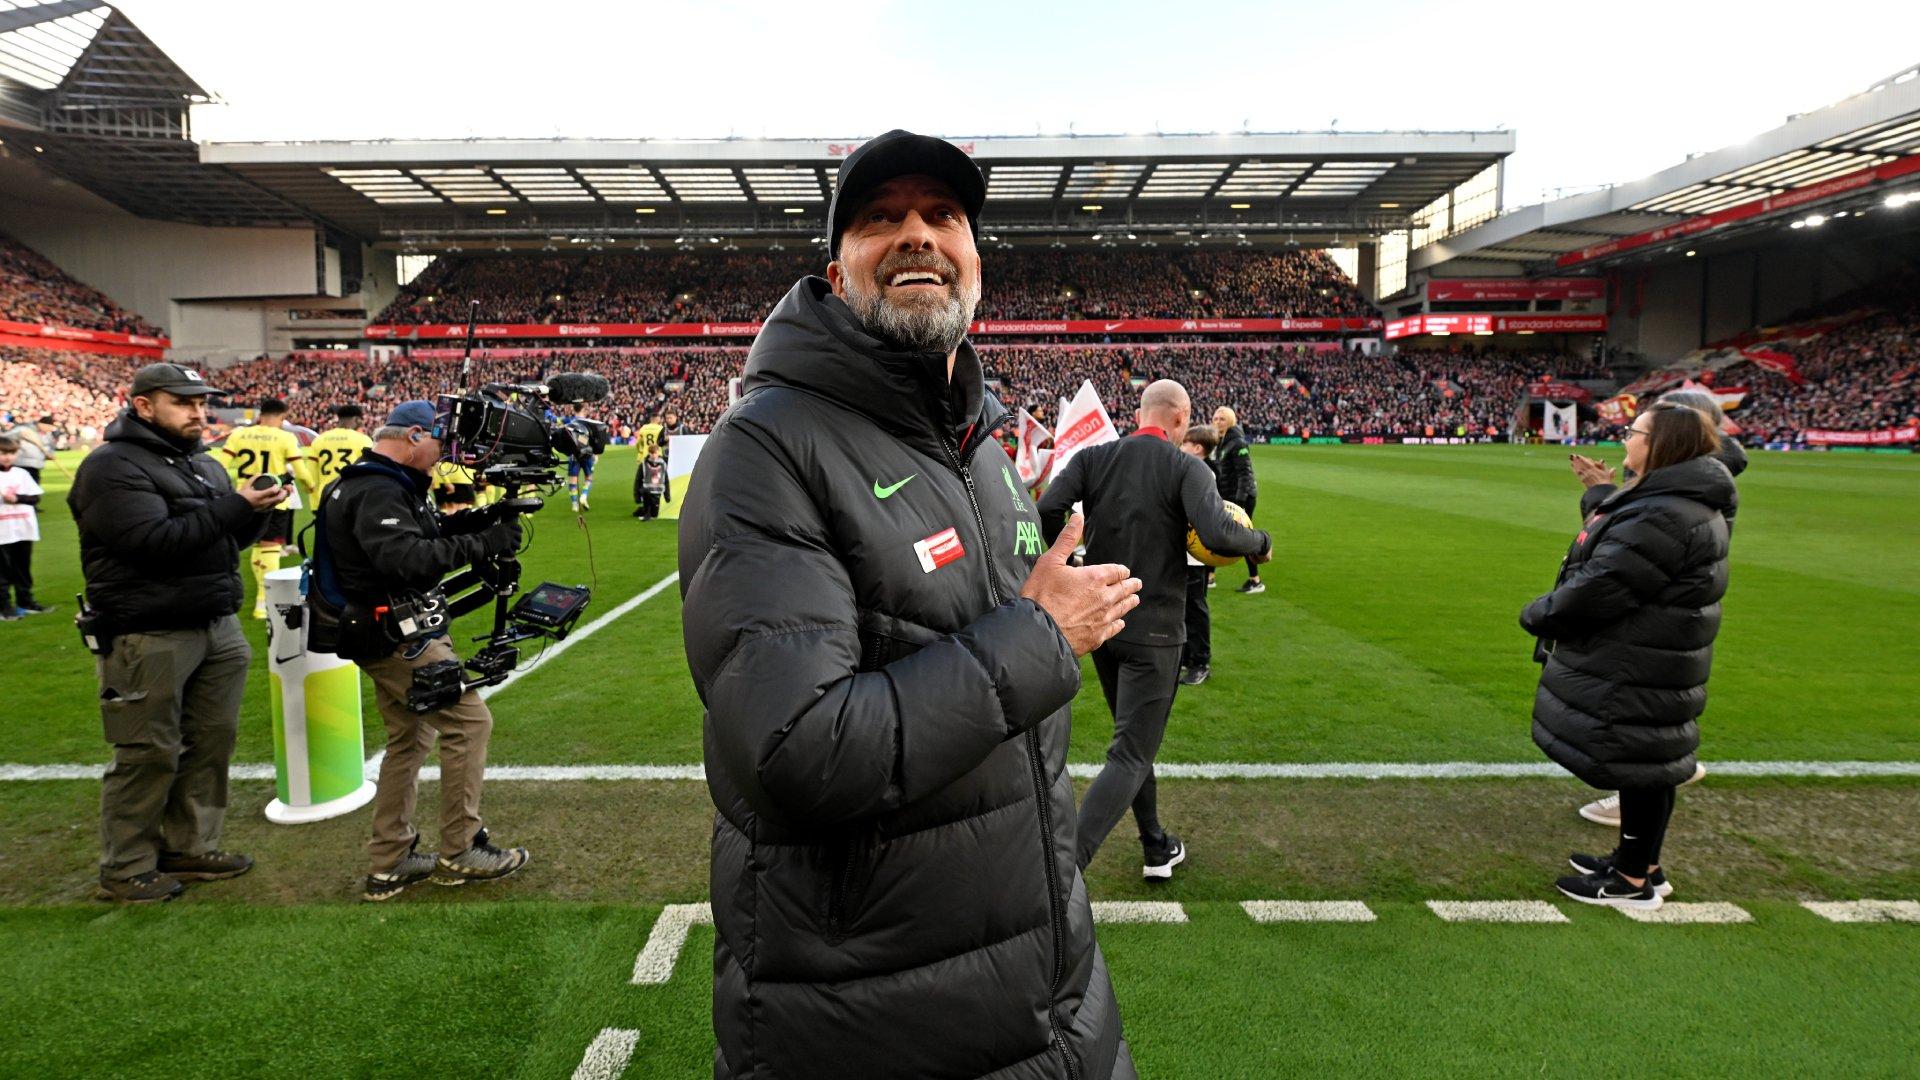 Tips for watching Klopp's final match at Anfield. - The Big Game